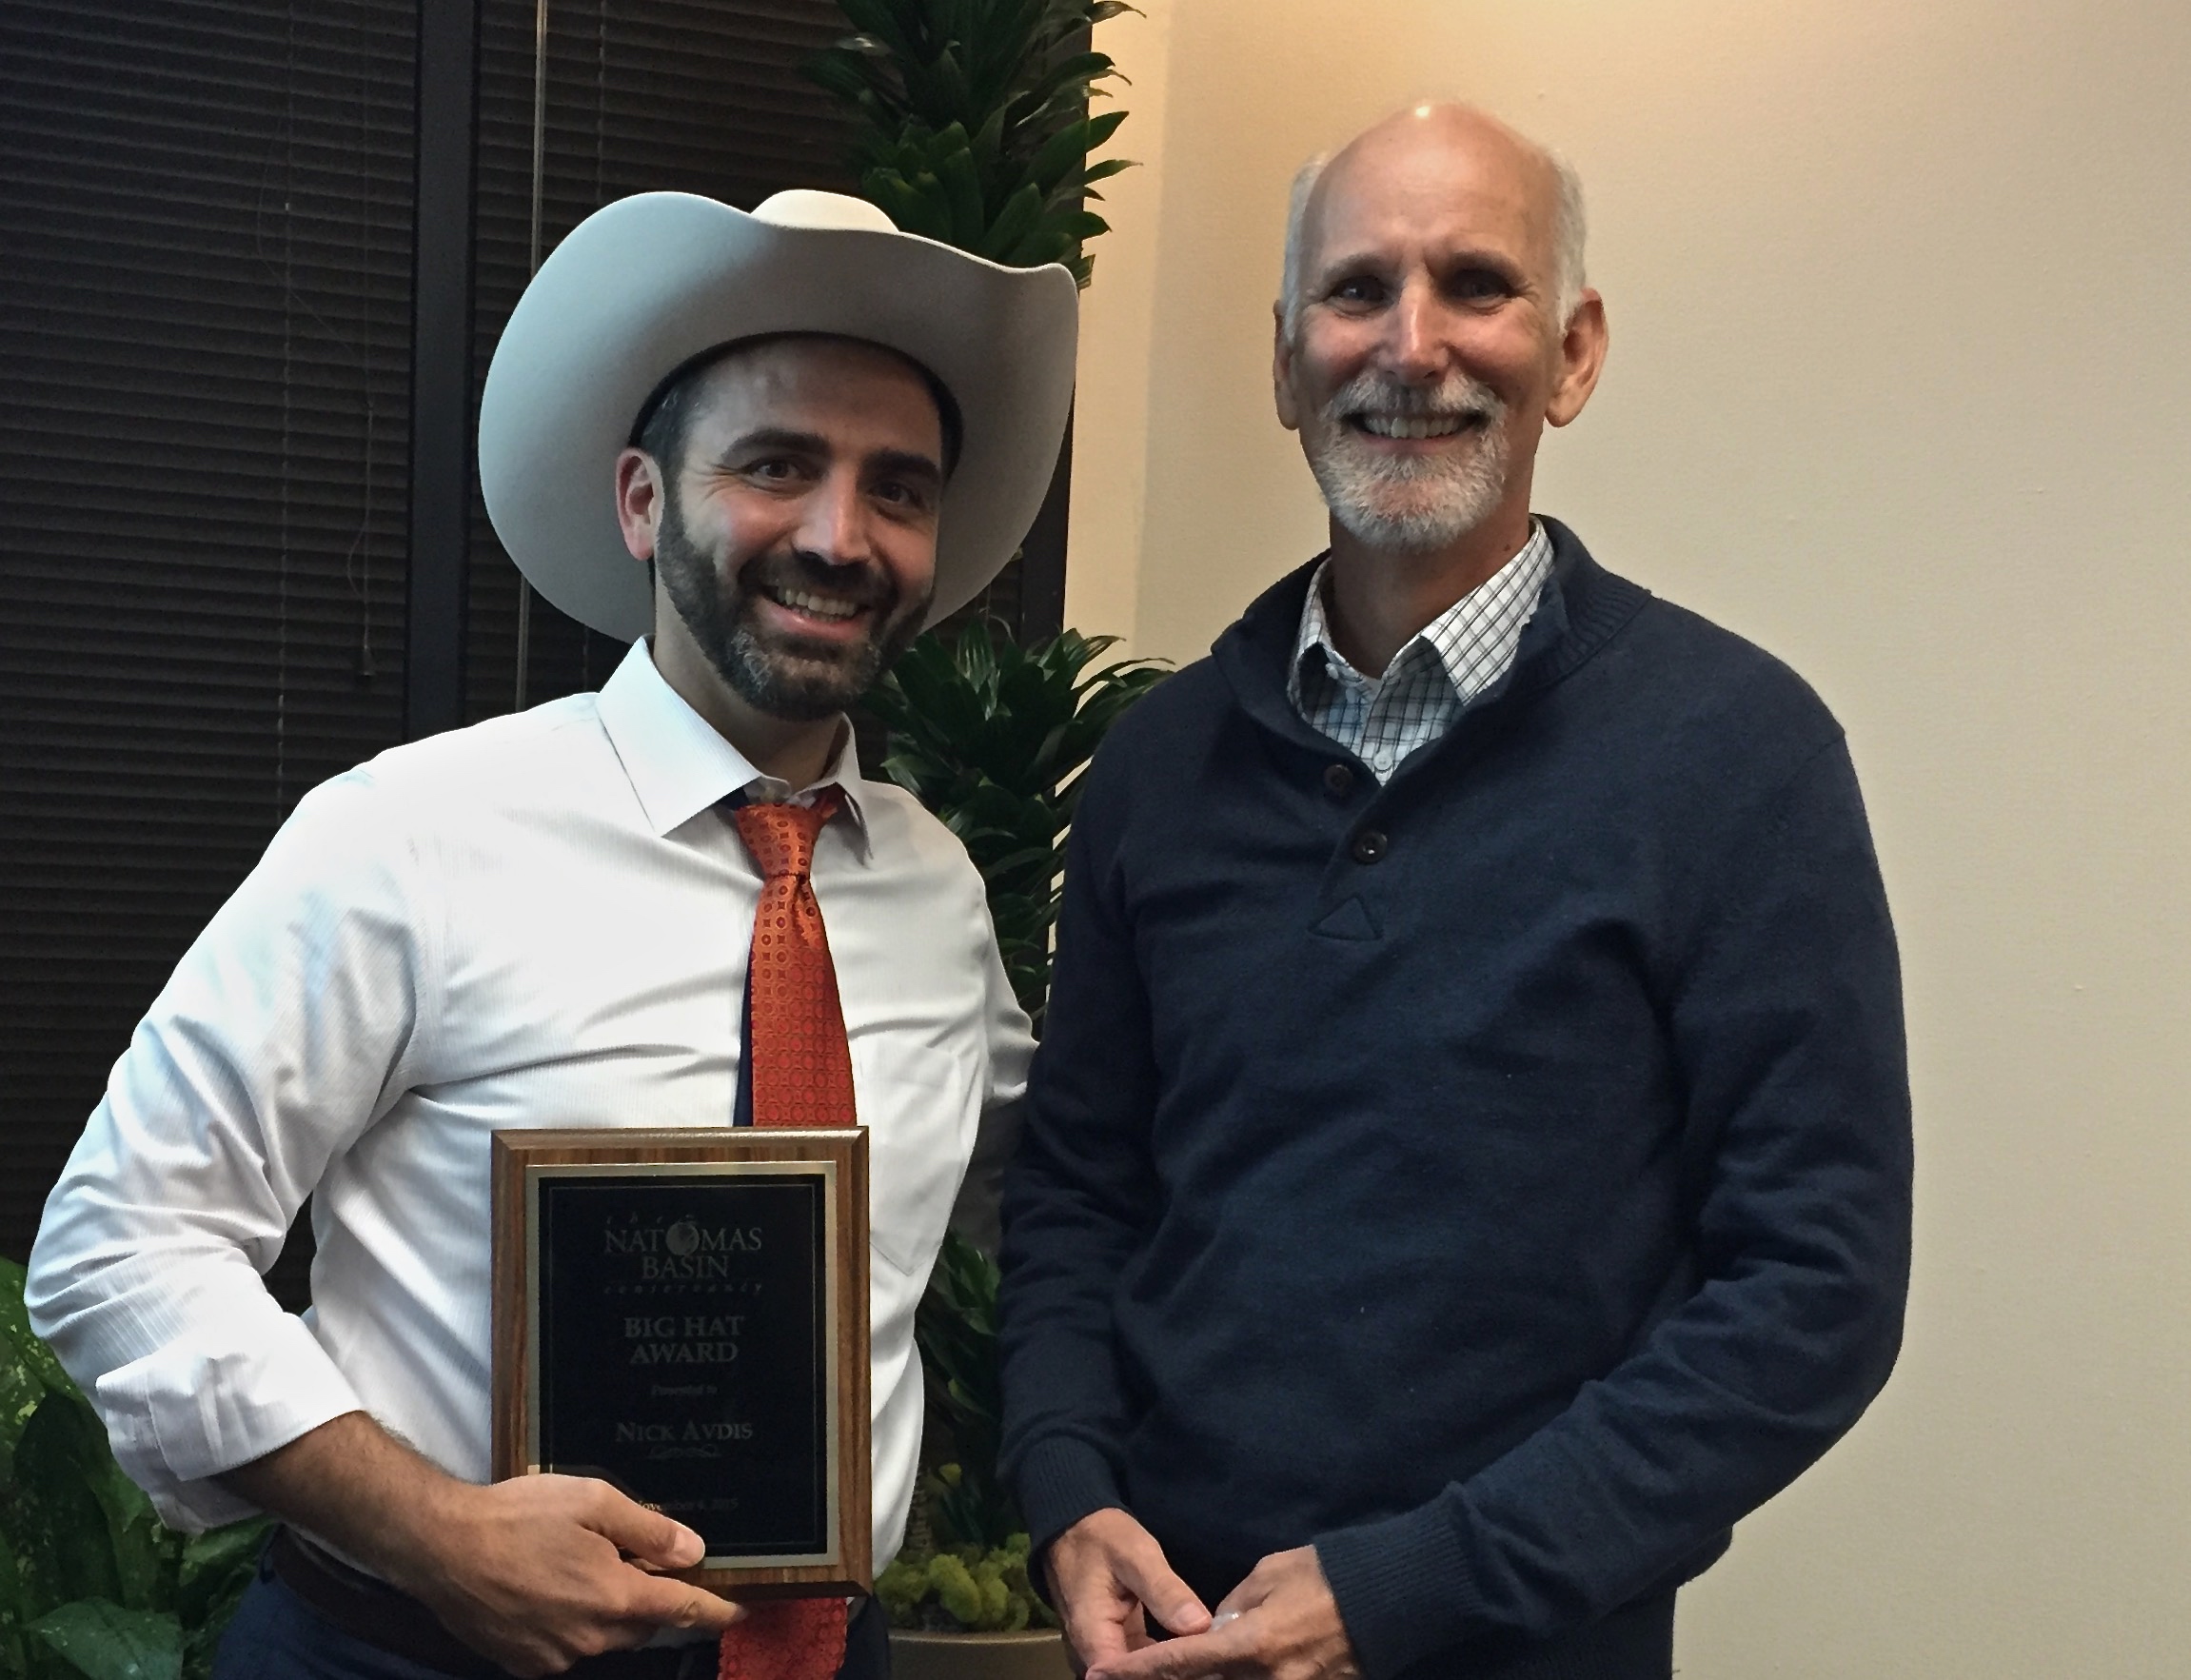 two men standing and facing the camera, smiling, with the one on the left wearing a stetson hat and holding a wooden plaque award